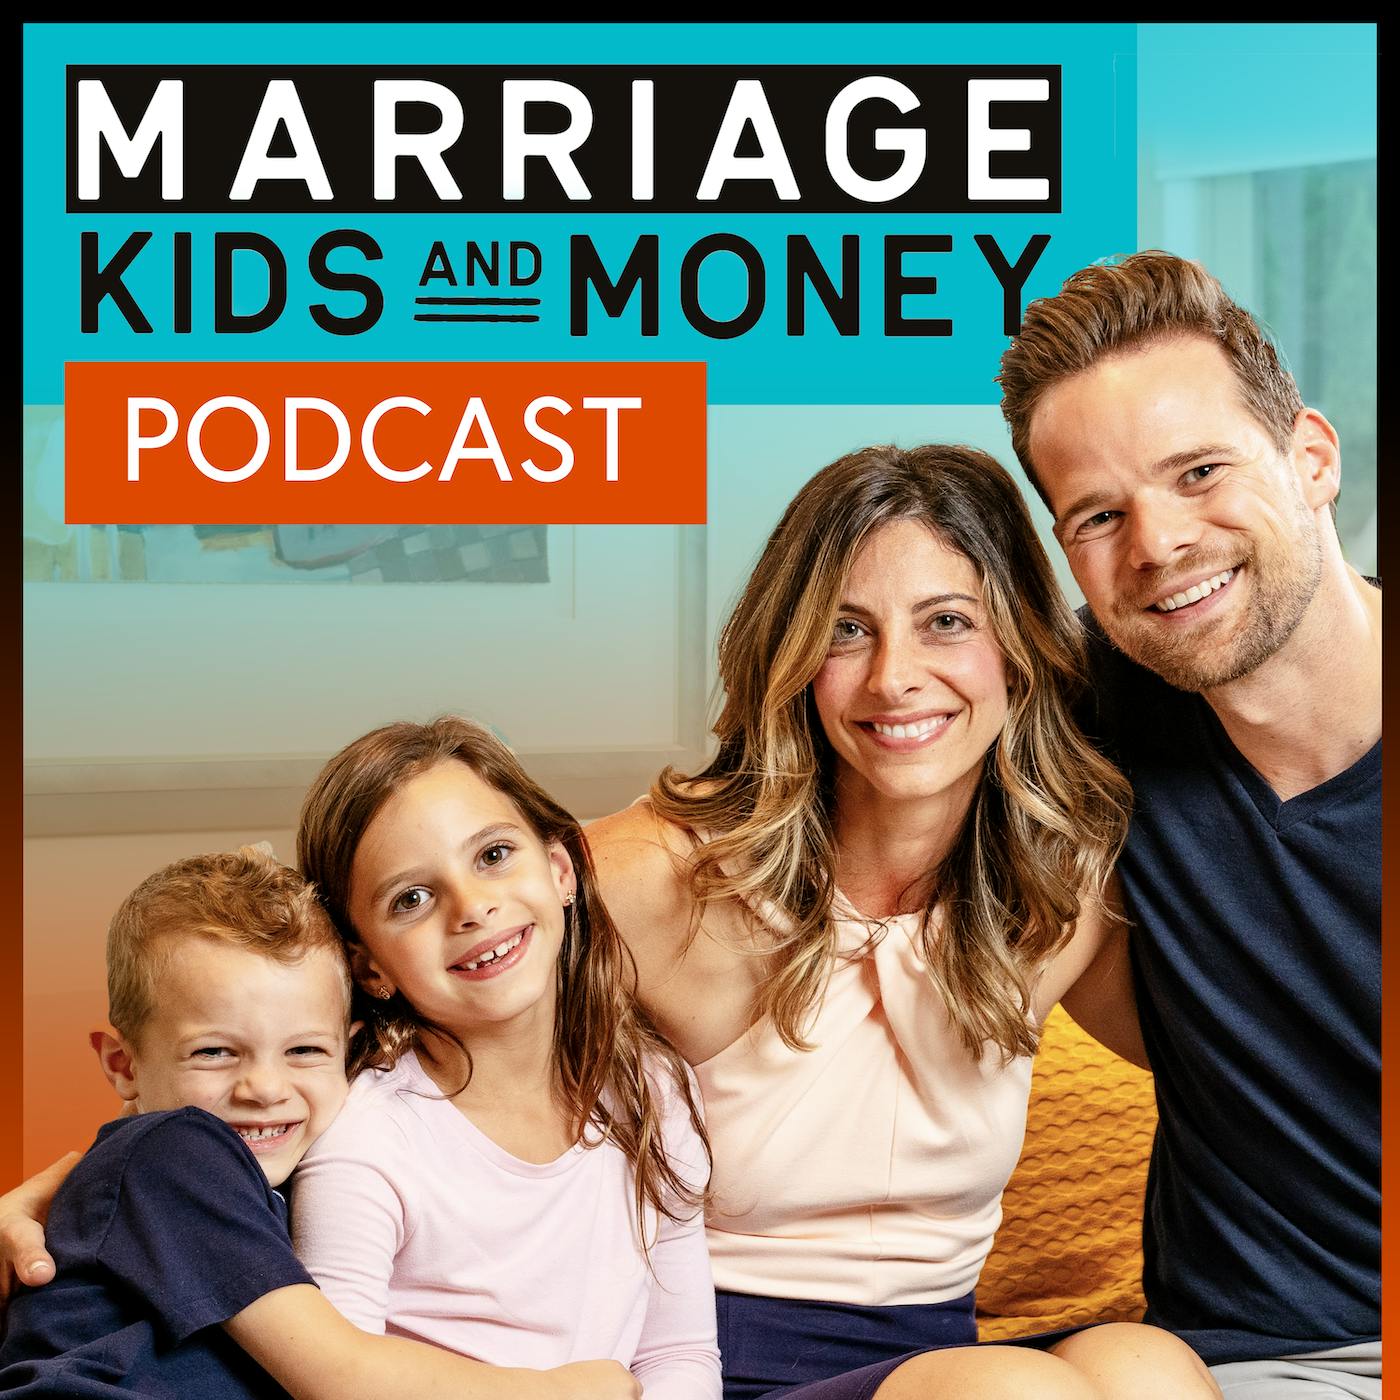 Should We Downsize Our Home? + How Our Debt Freedom Helped us Avoid Divorce (Kristin Stones)